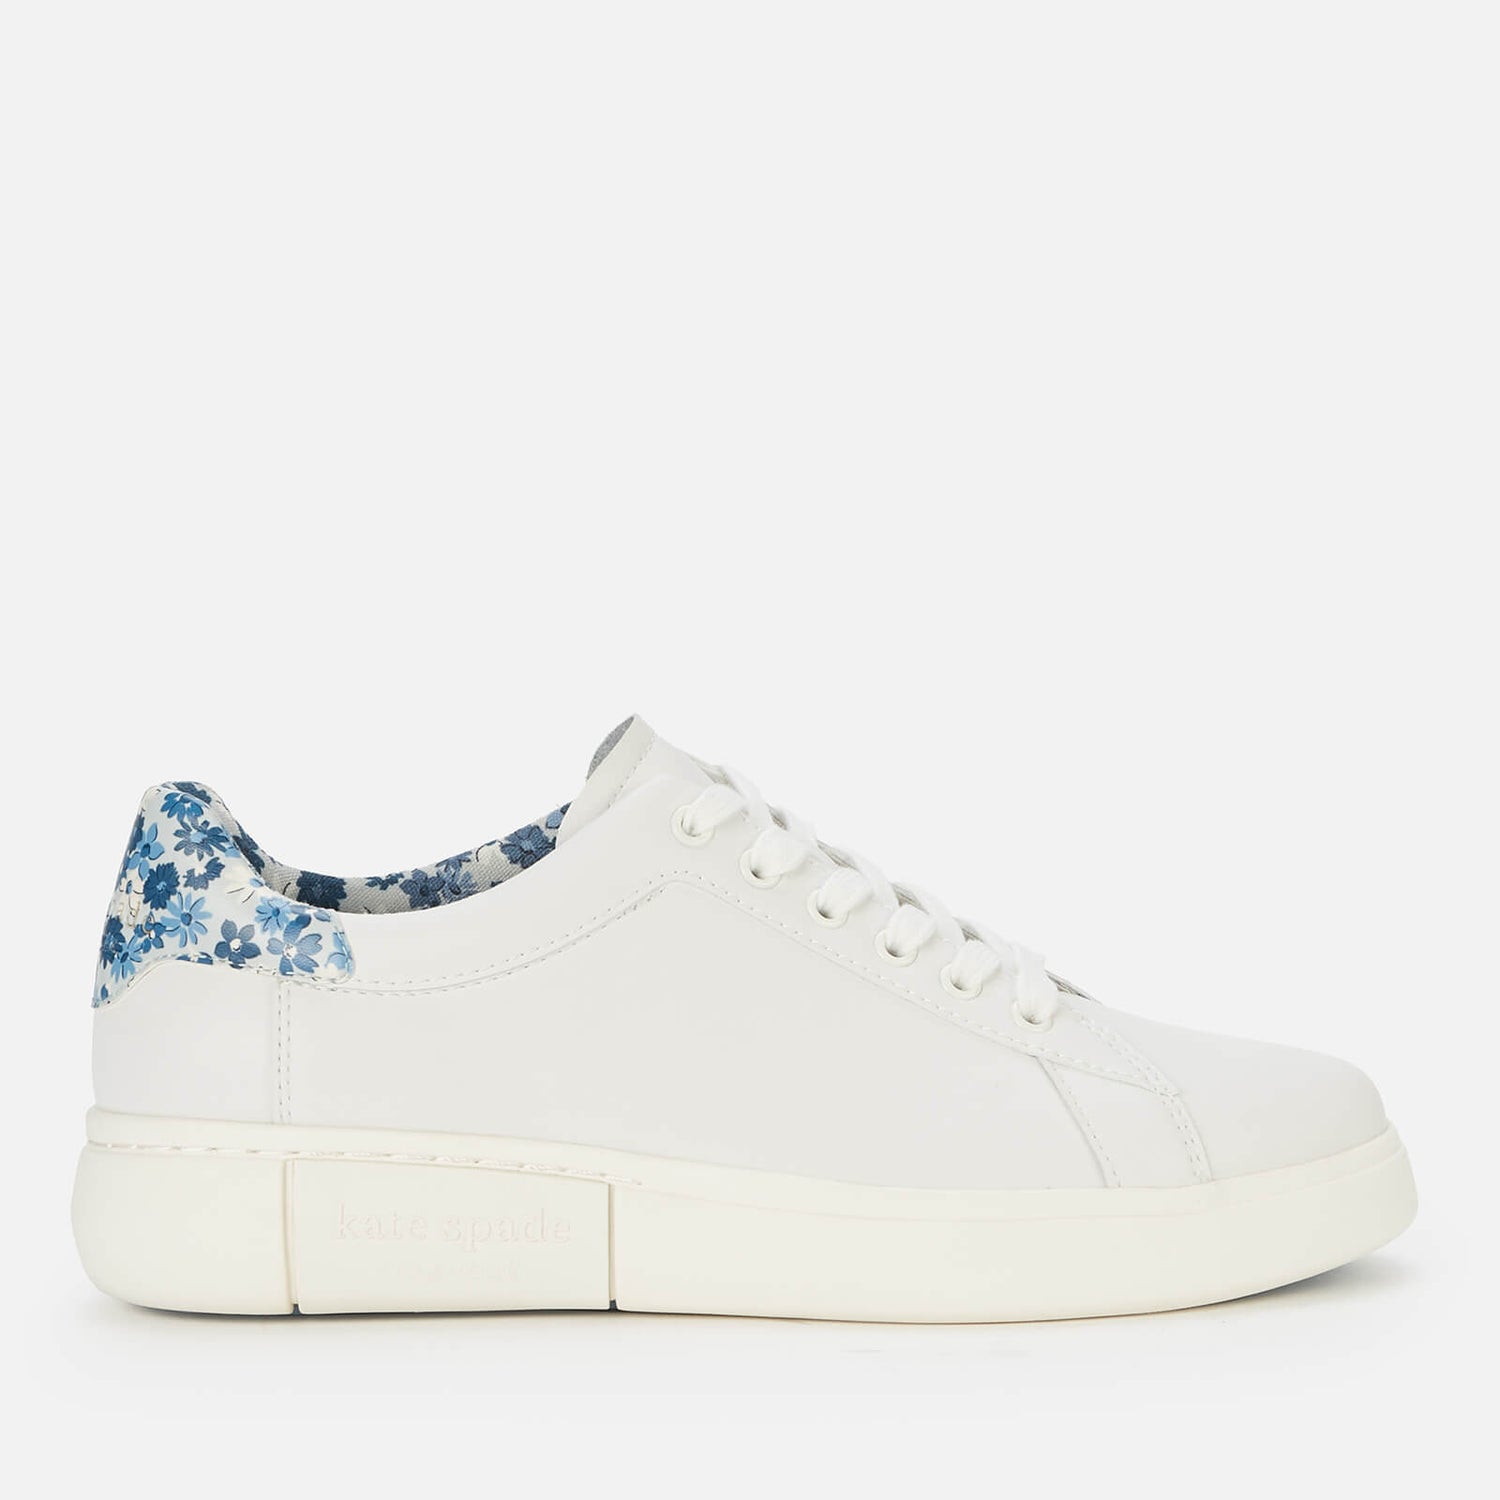 Kate Spade New York Women's Lift Leather Flatform Trainers - Optic White/Blue Floral - UK 4